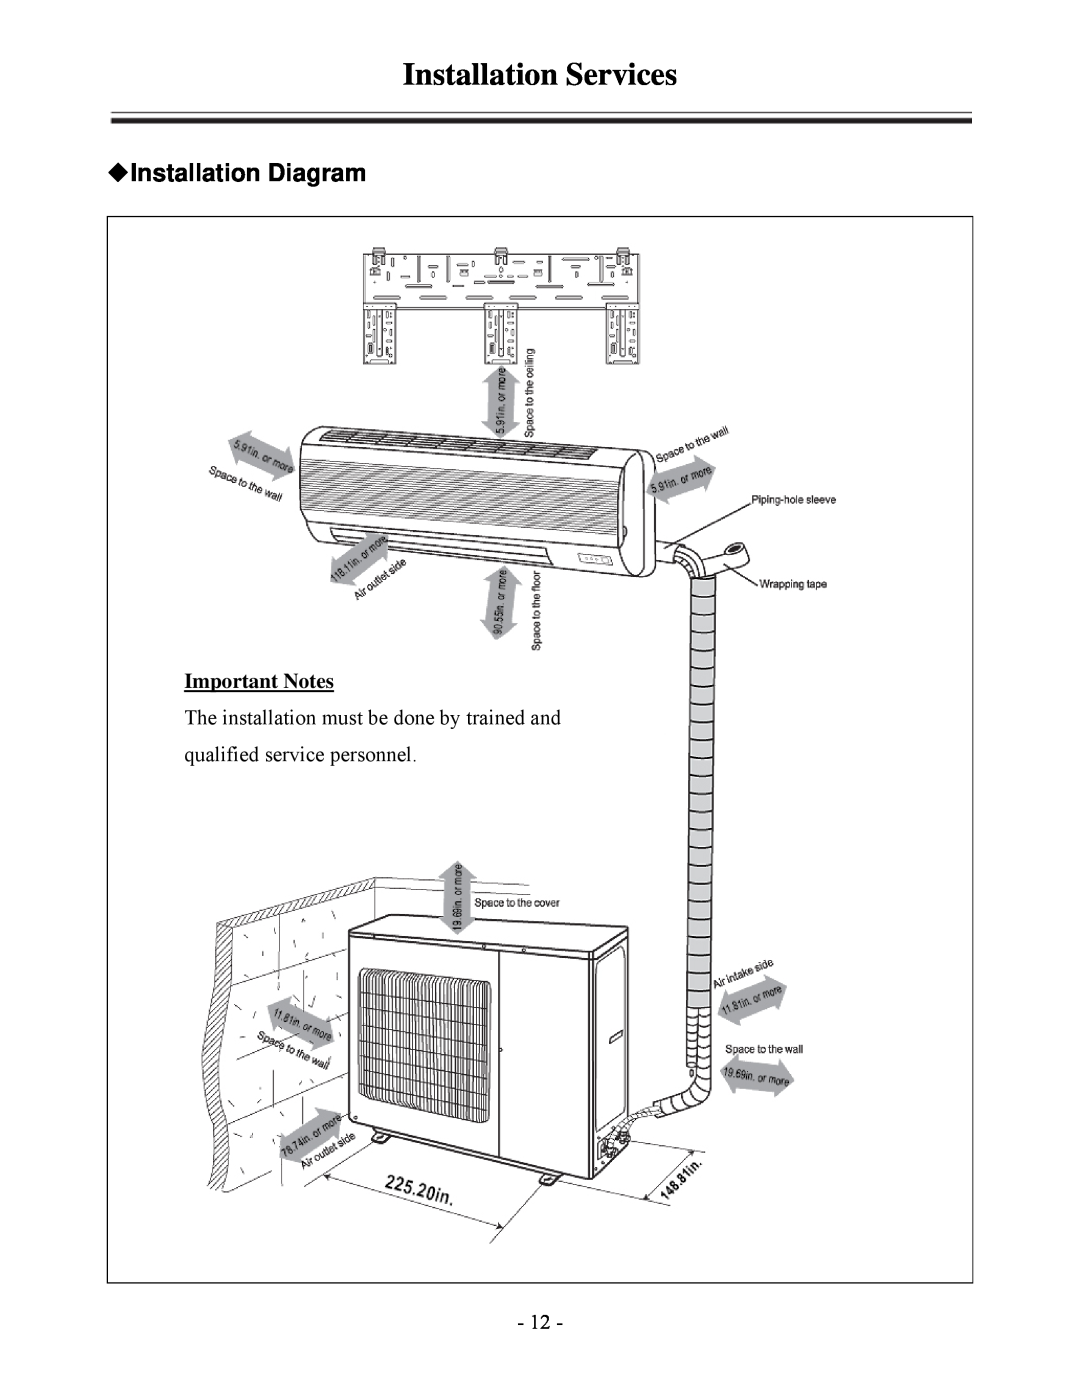 Soleus Air KFHHP-22-OD, KFHHP-22-ID installation manual Installation Services, Installation Diagram, Important Notes 